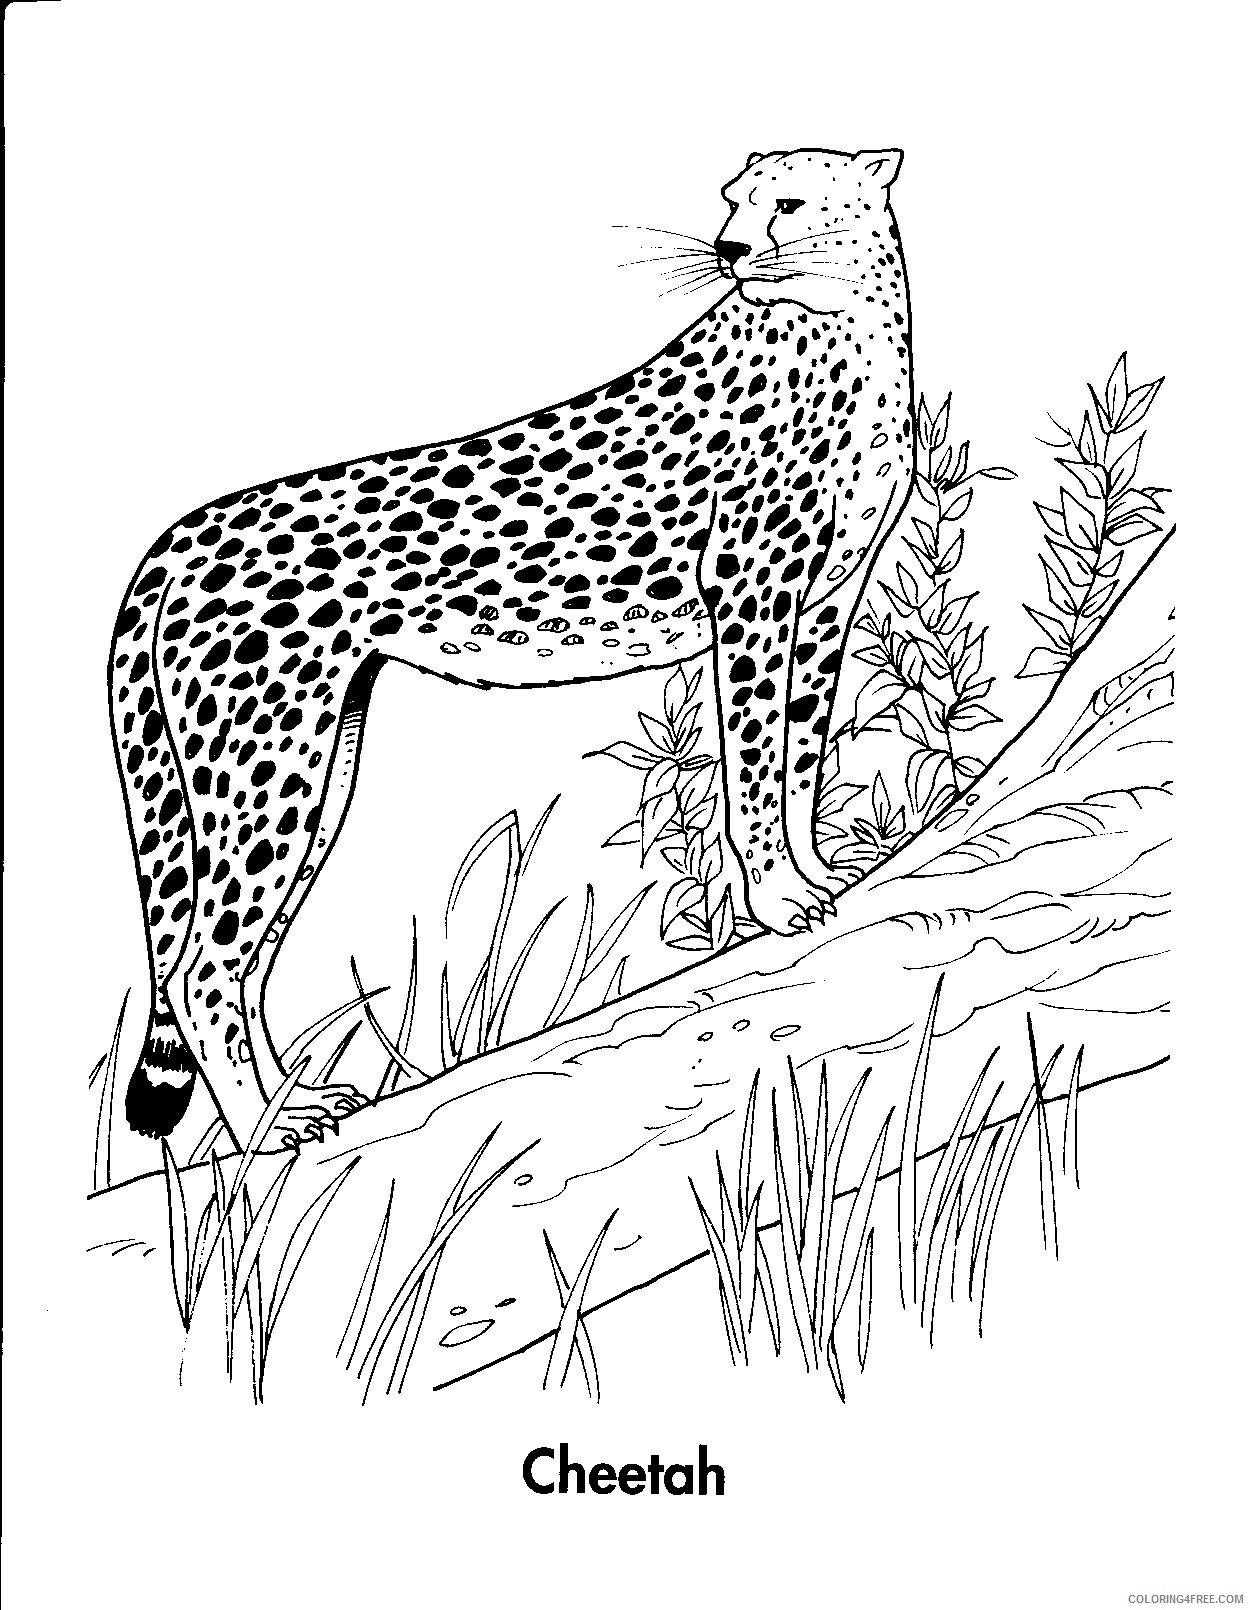 cheetah coloring pages standing on tree Coloring4free